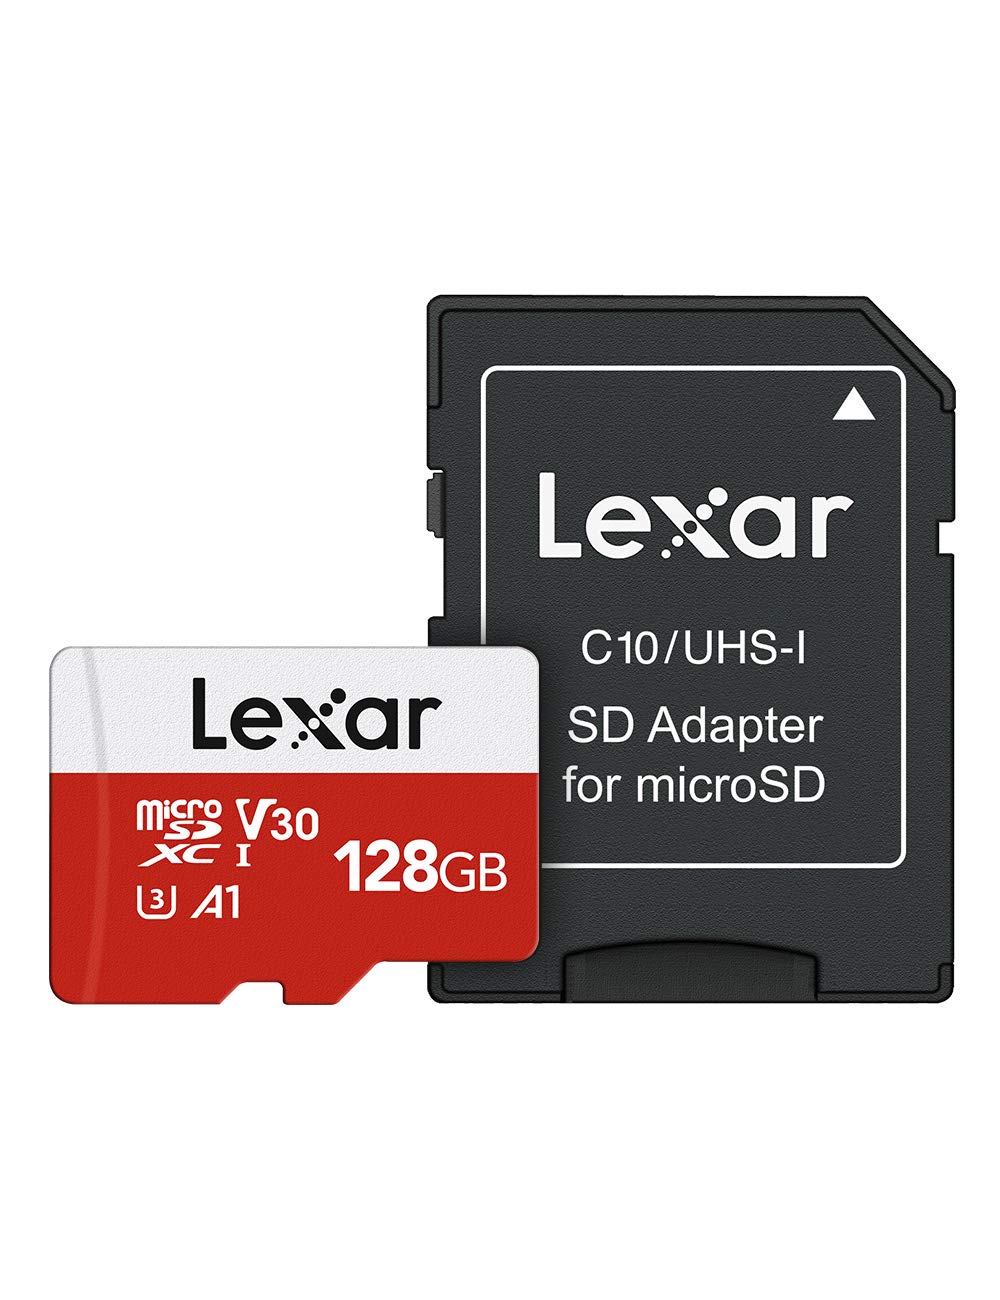 Lexar 128GB Micro SD Card, microSDXC UHS-I Flash Memory Card with Adapter - Up to 100MB/s, A1, U3, Class10, V30, High Speed TF Card